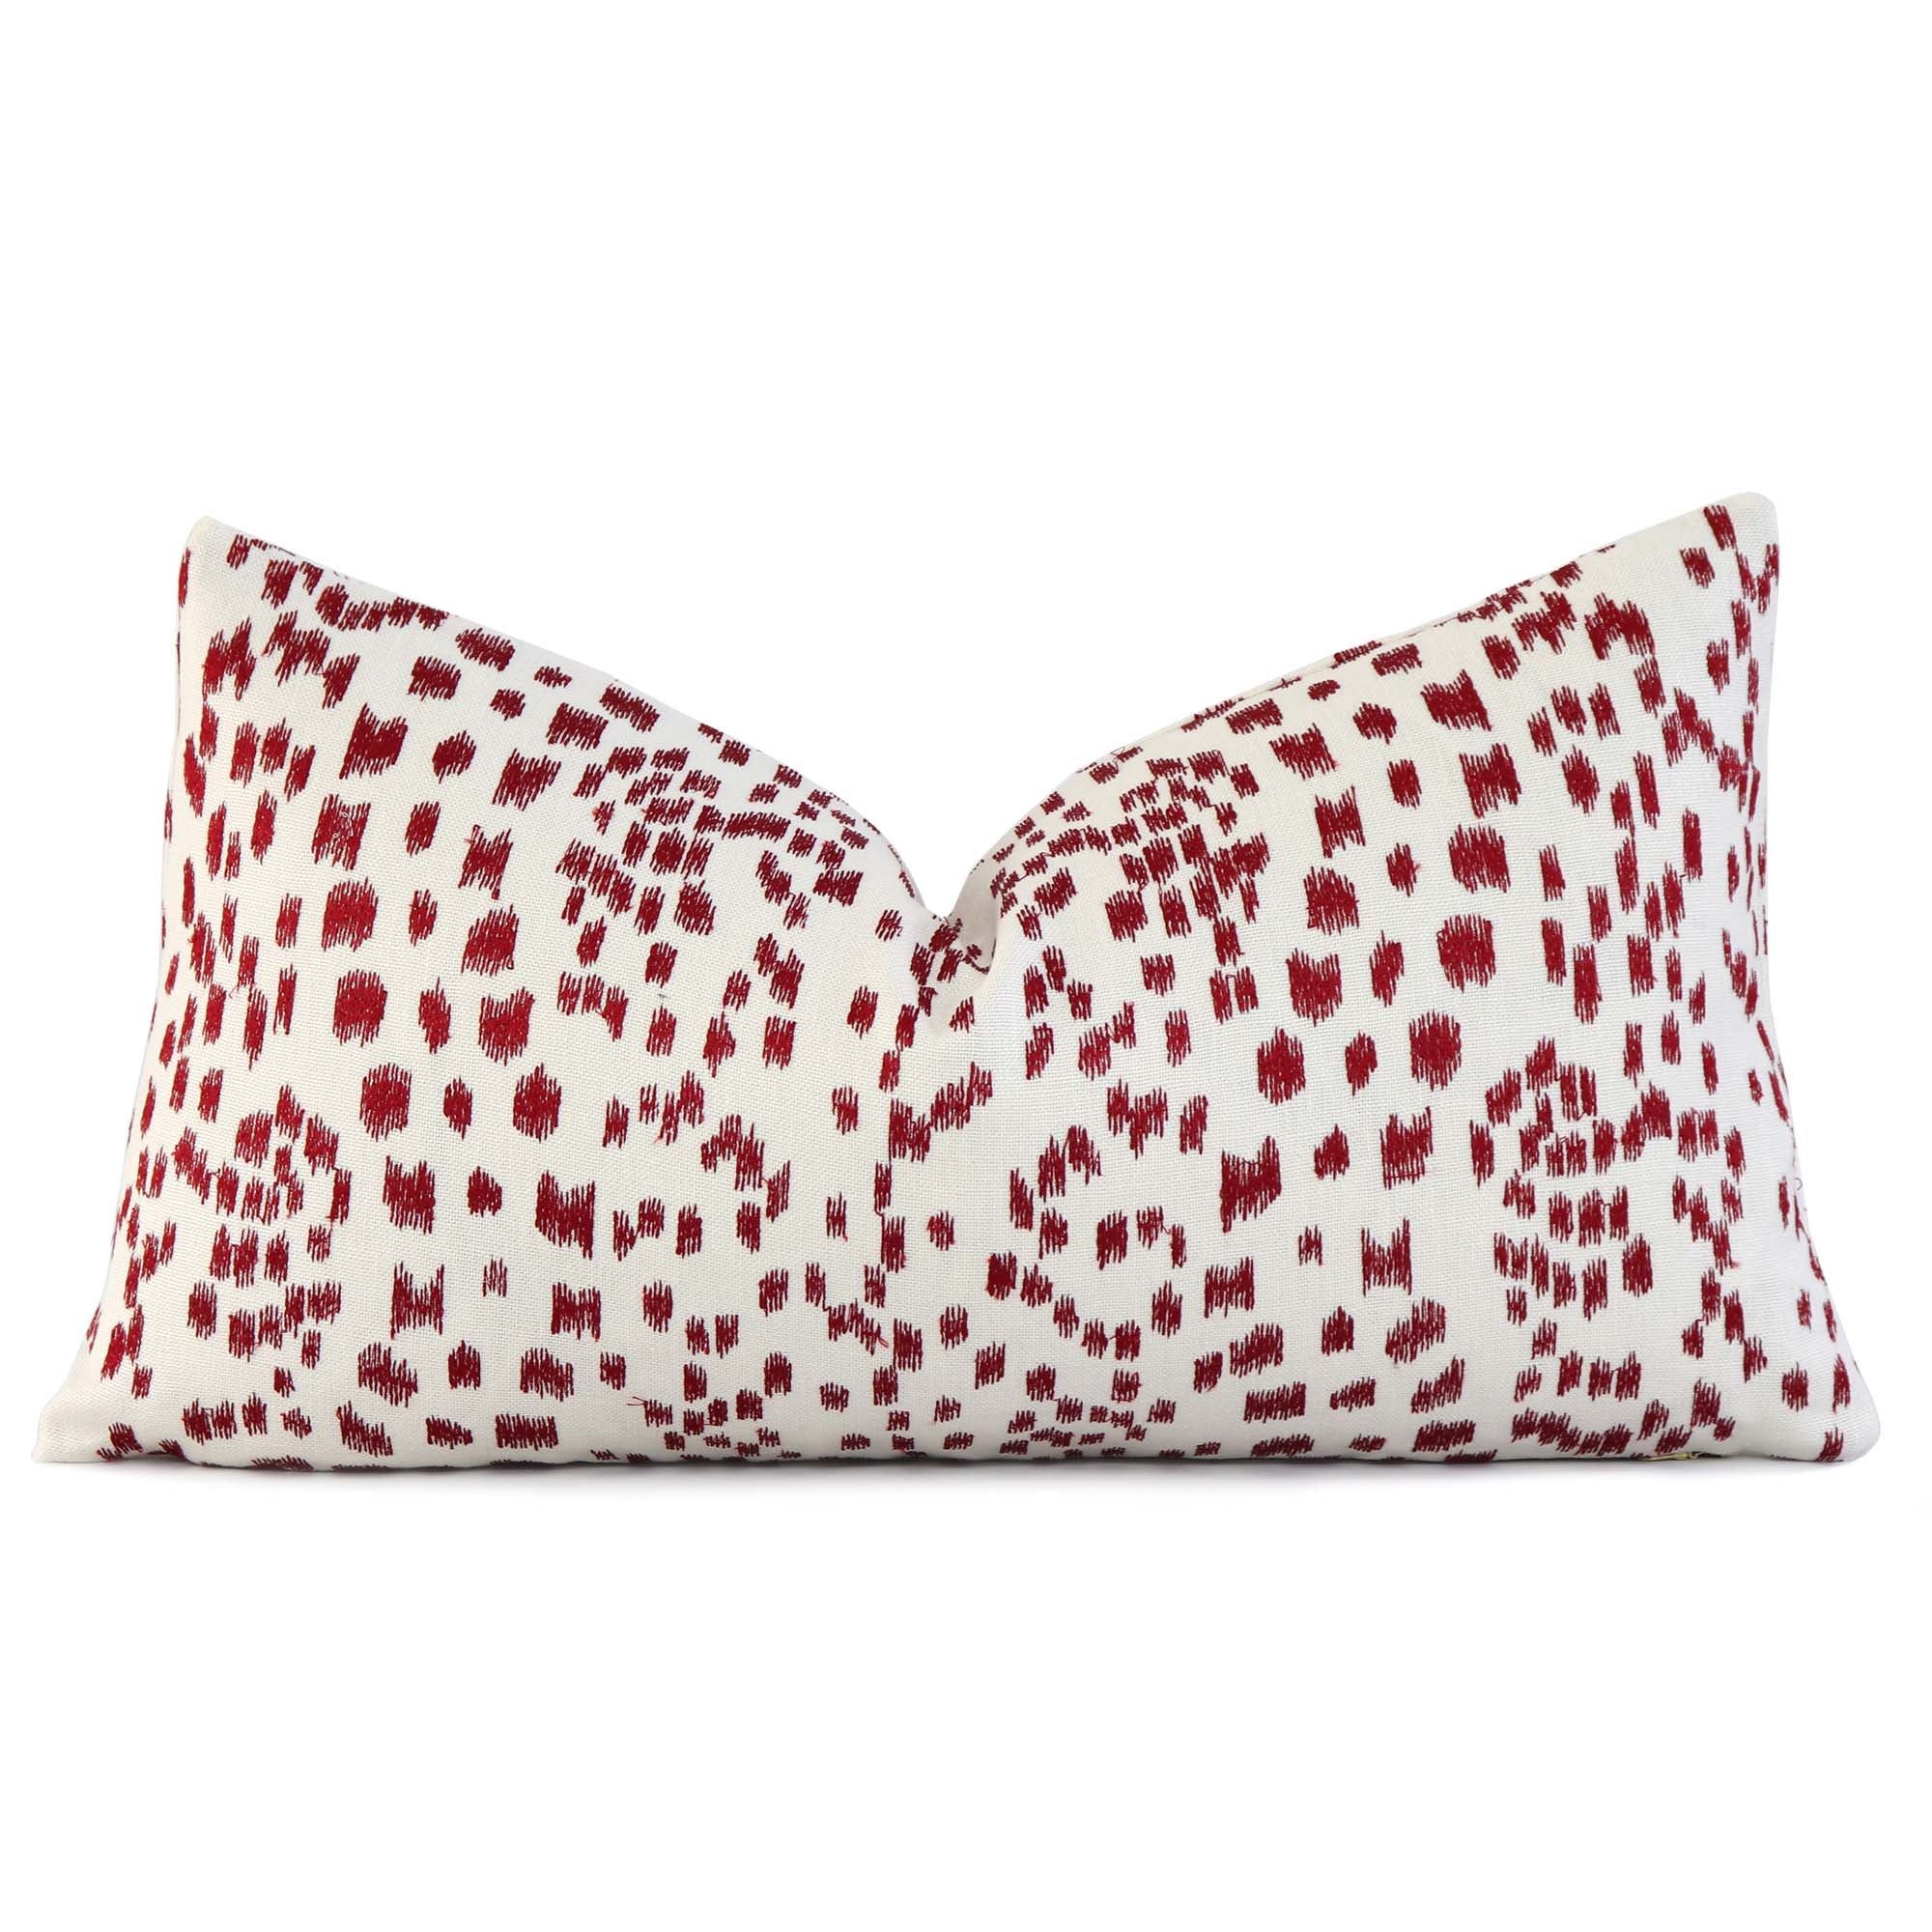 Brunschwig Fils Les Touches Embroidered Poppy Red Luxury Designer Lumbar Throw Pillow Cover